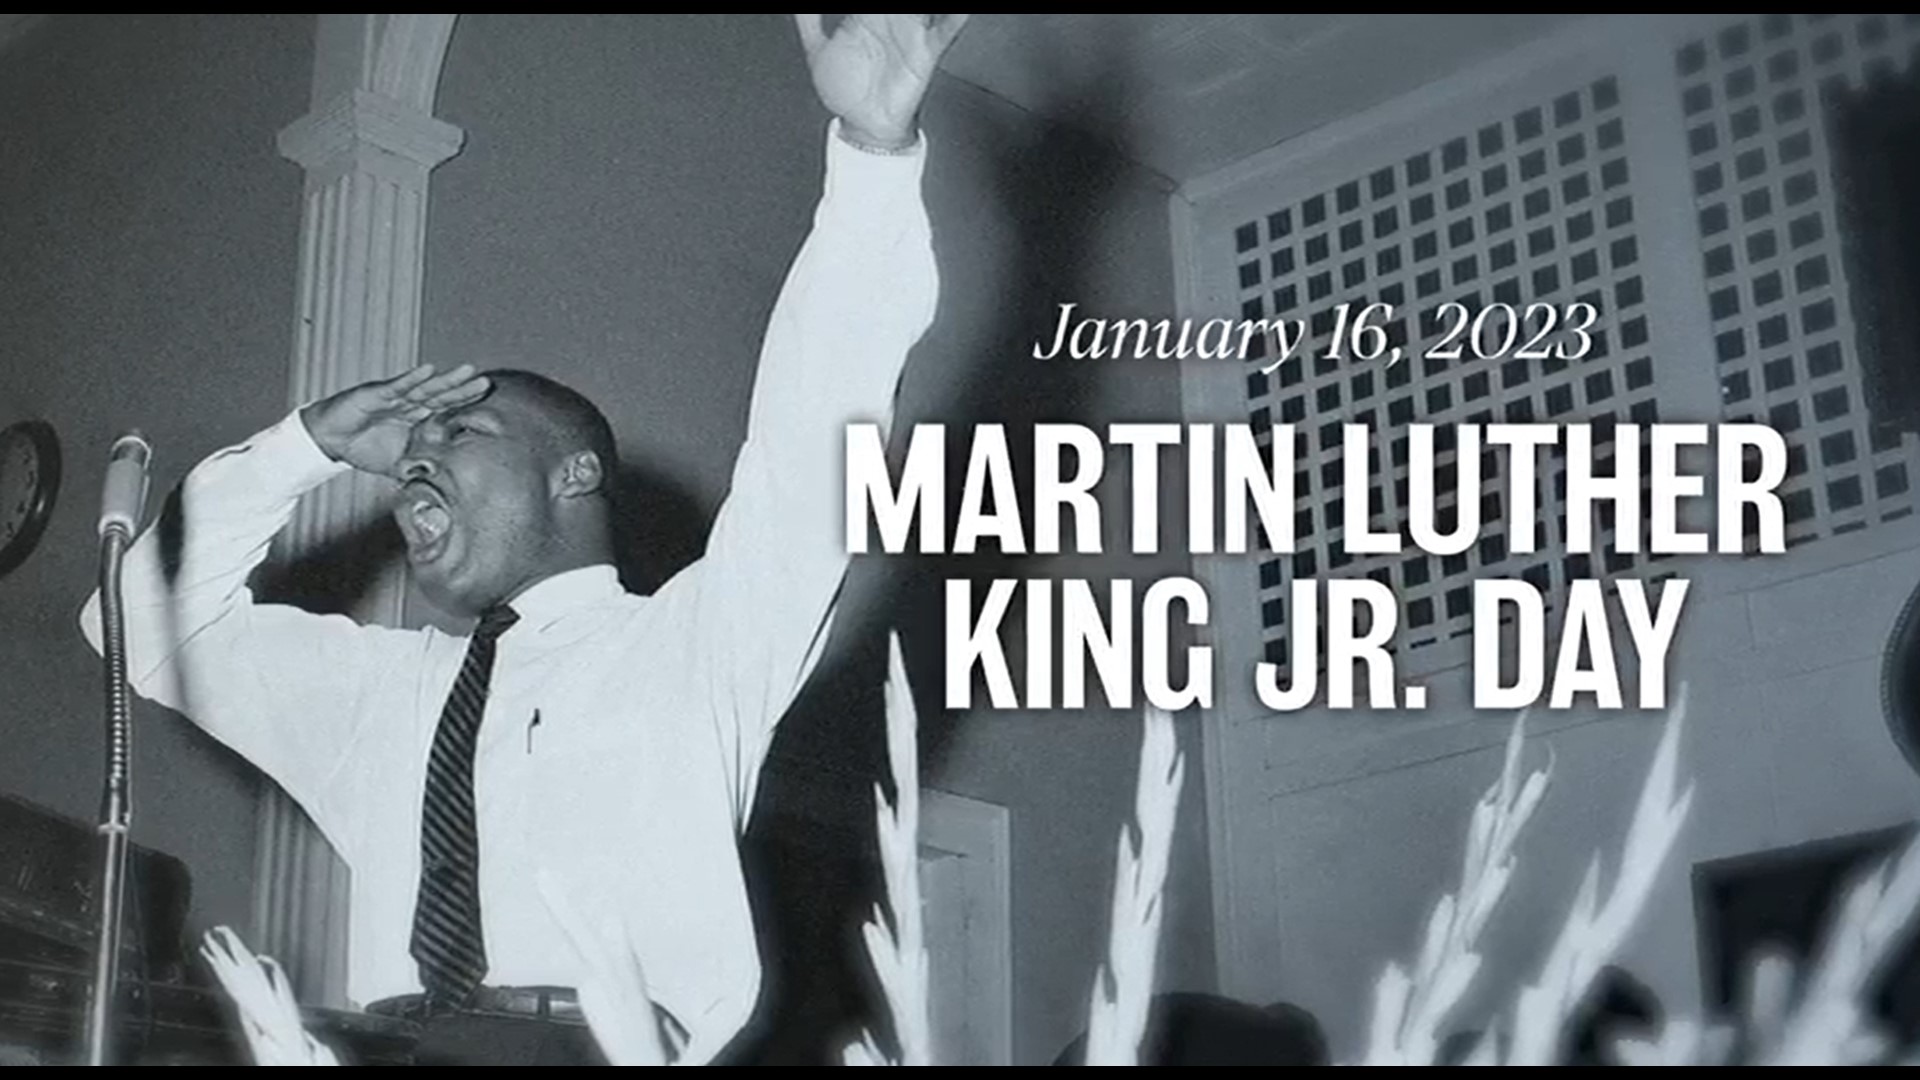 Martin Luther King, Jr's birthday will be observed Monday, January 16. Millions will celebrate his life and legacy with a day of service.